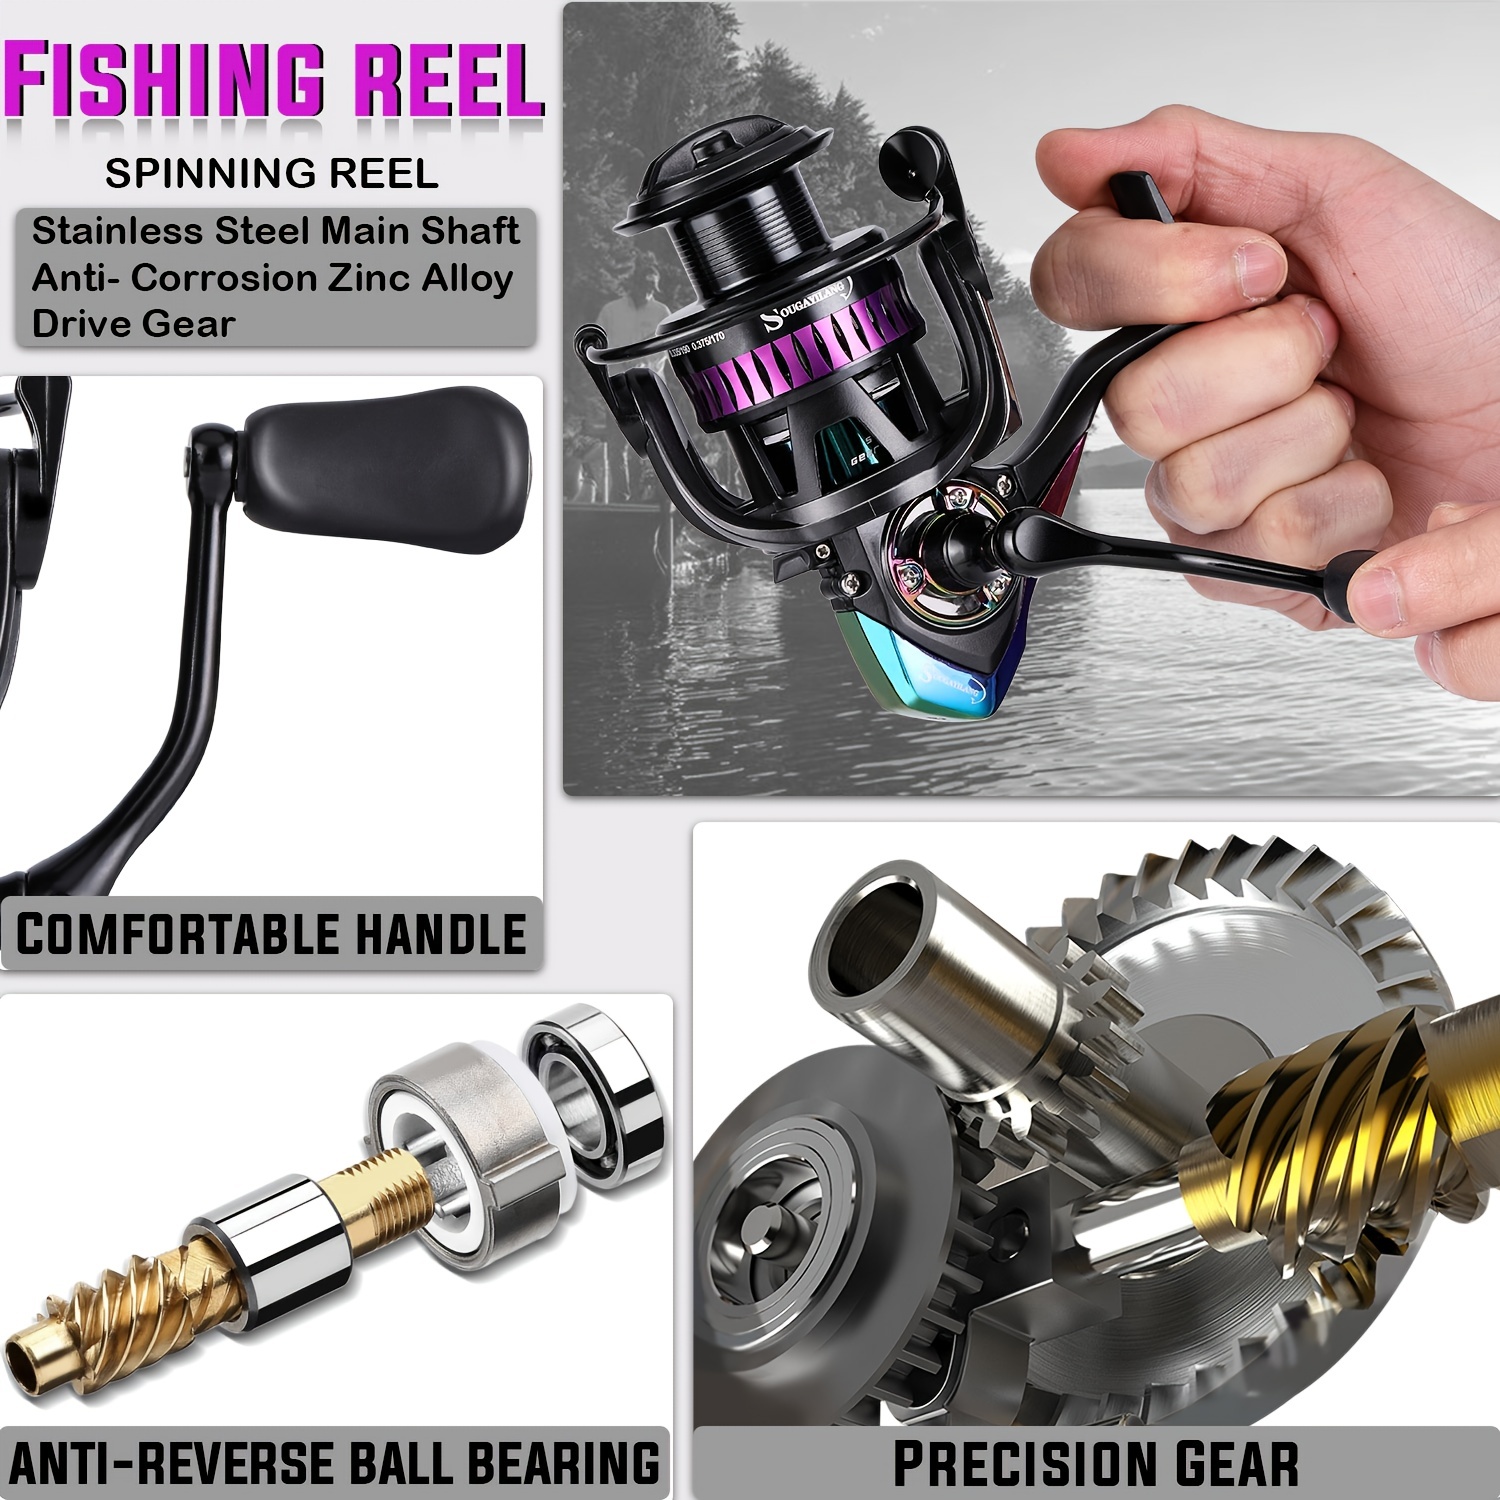 Sougayilang Spinning Fishing Reel | Light Weight | High-Speed Gear Ratio |  12+1 Stainless BB | CNC Aluminum Spool